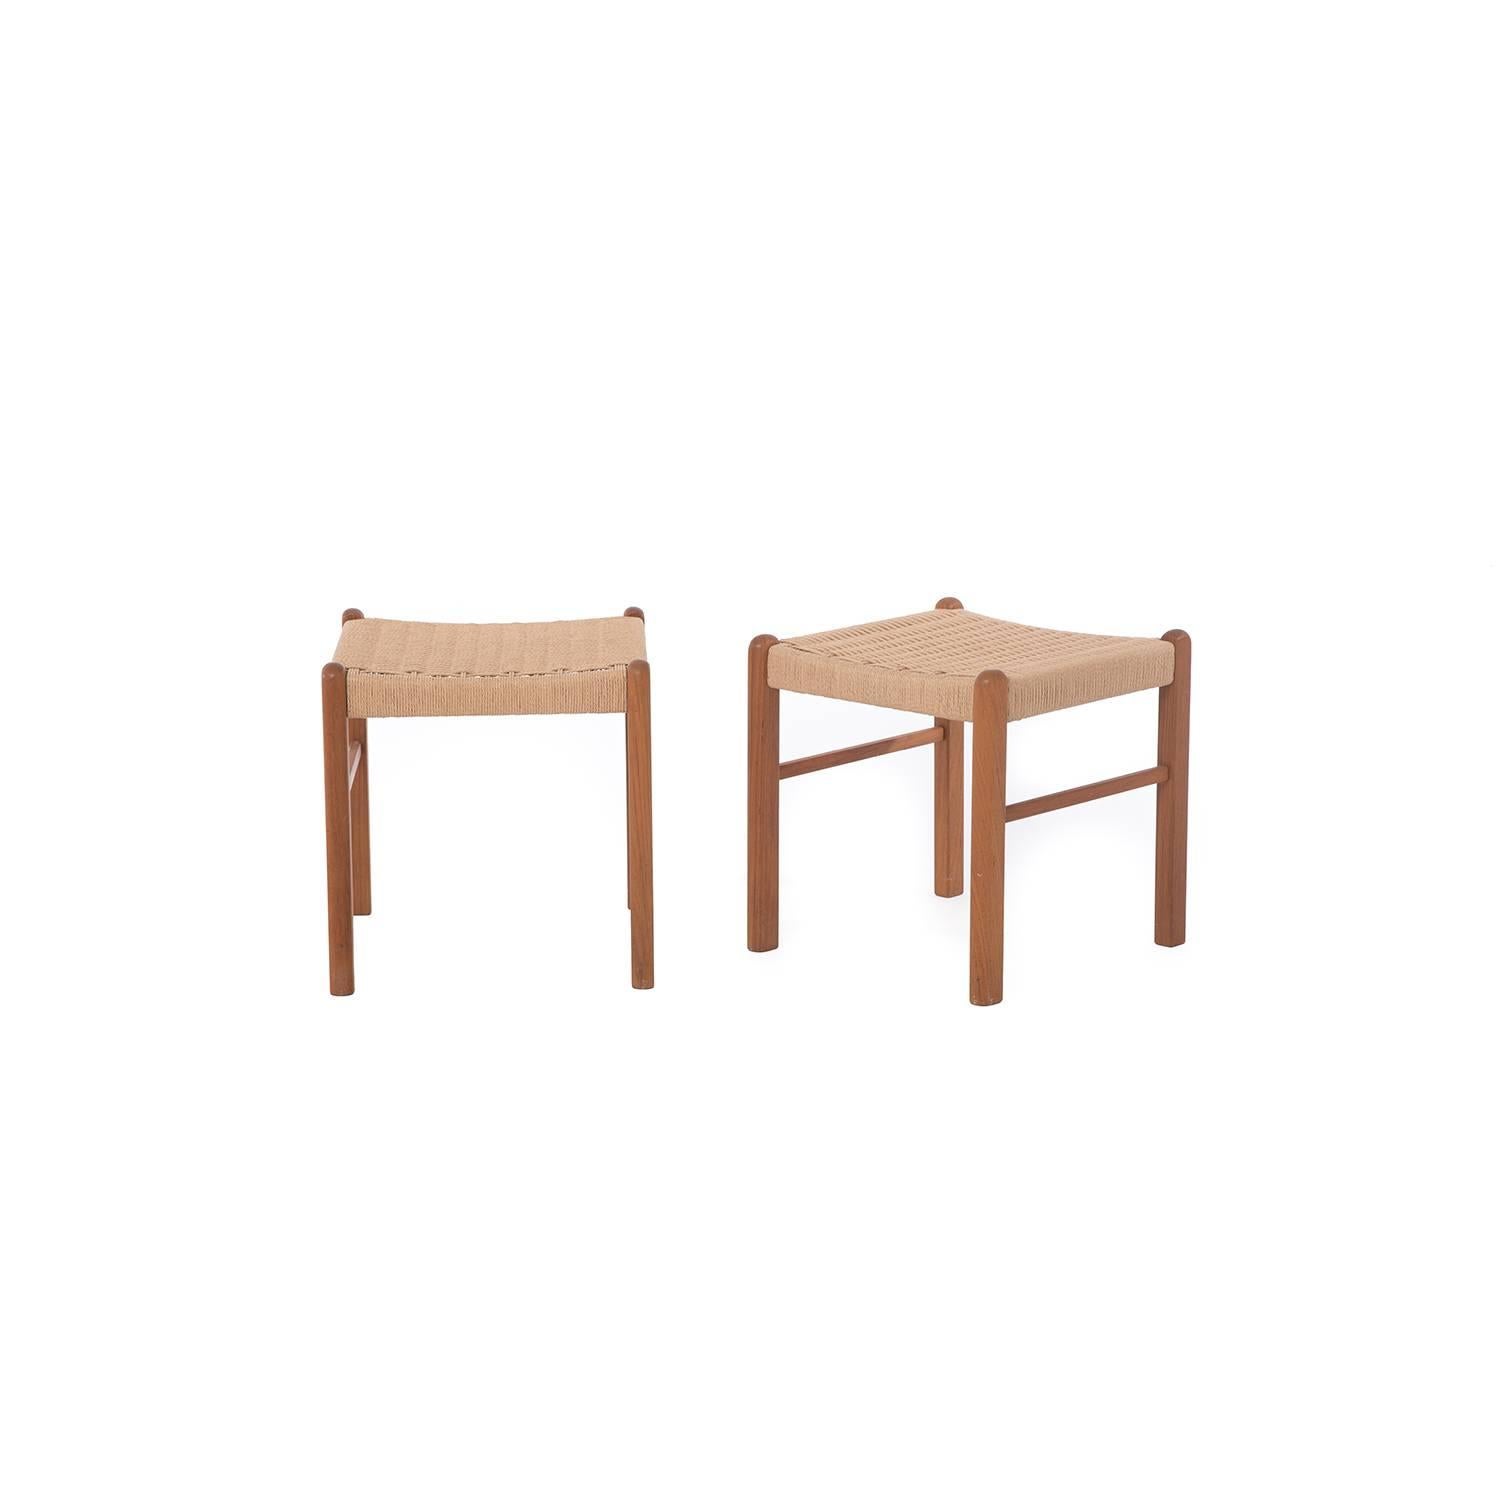 These Danish modern stools by J.L. Møller mix teak with a paper cord seat in an adorable 18 inch cube shape. Sold as a pair.